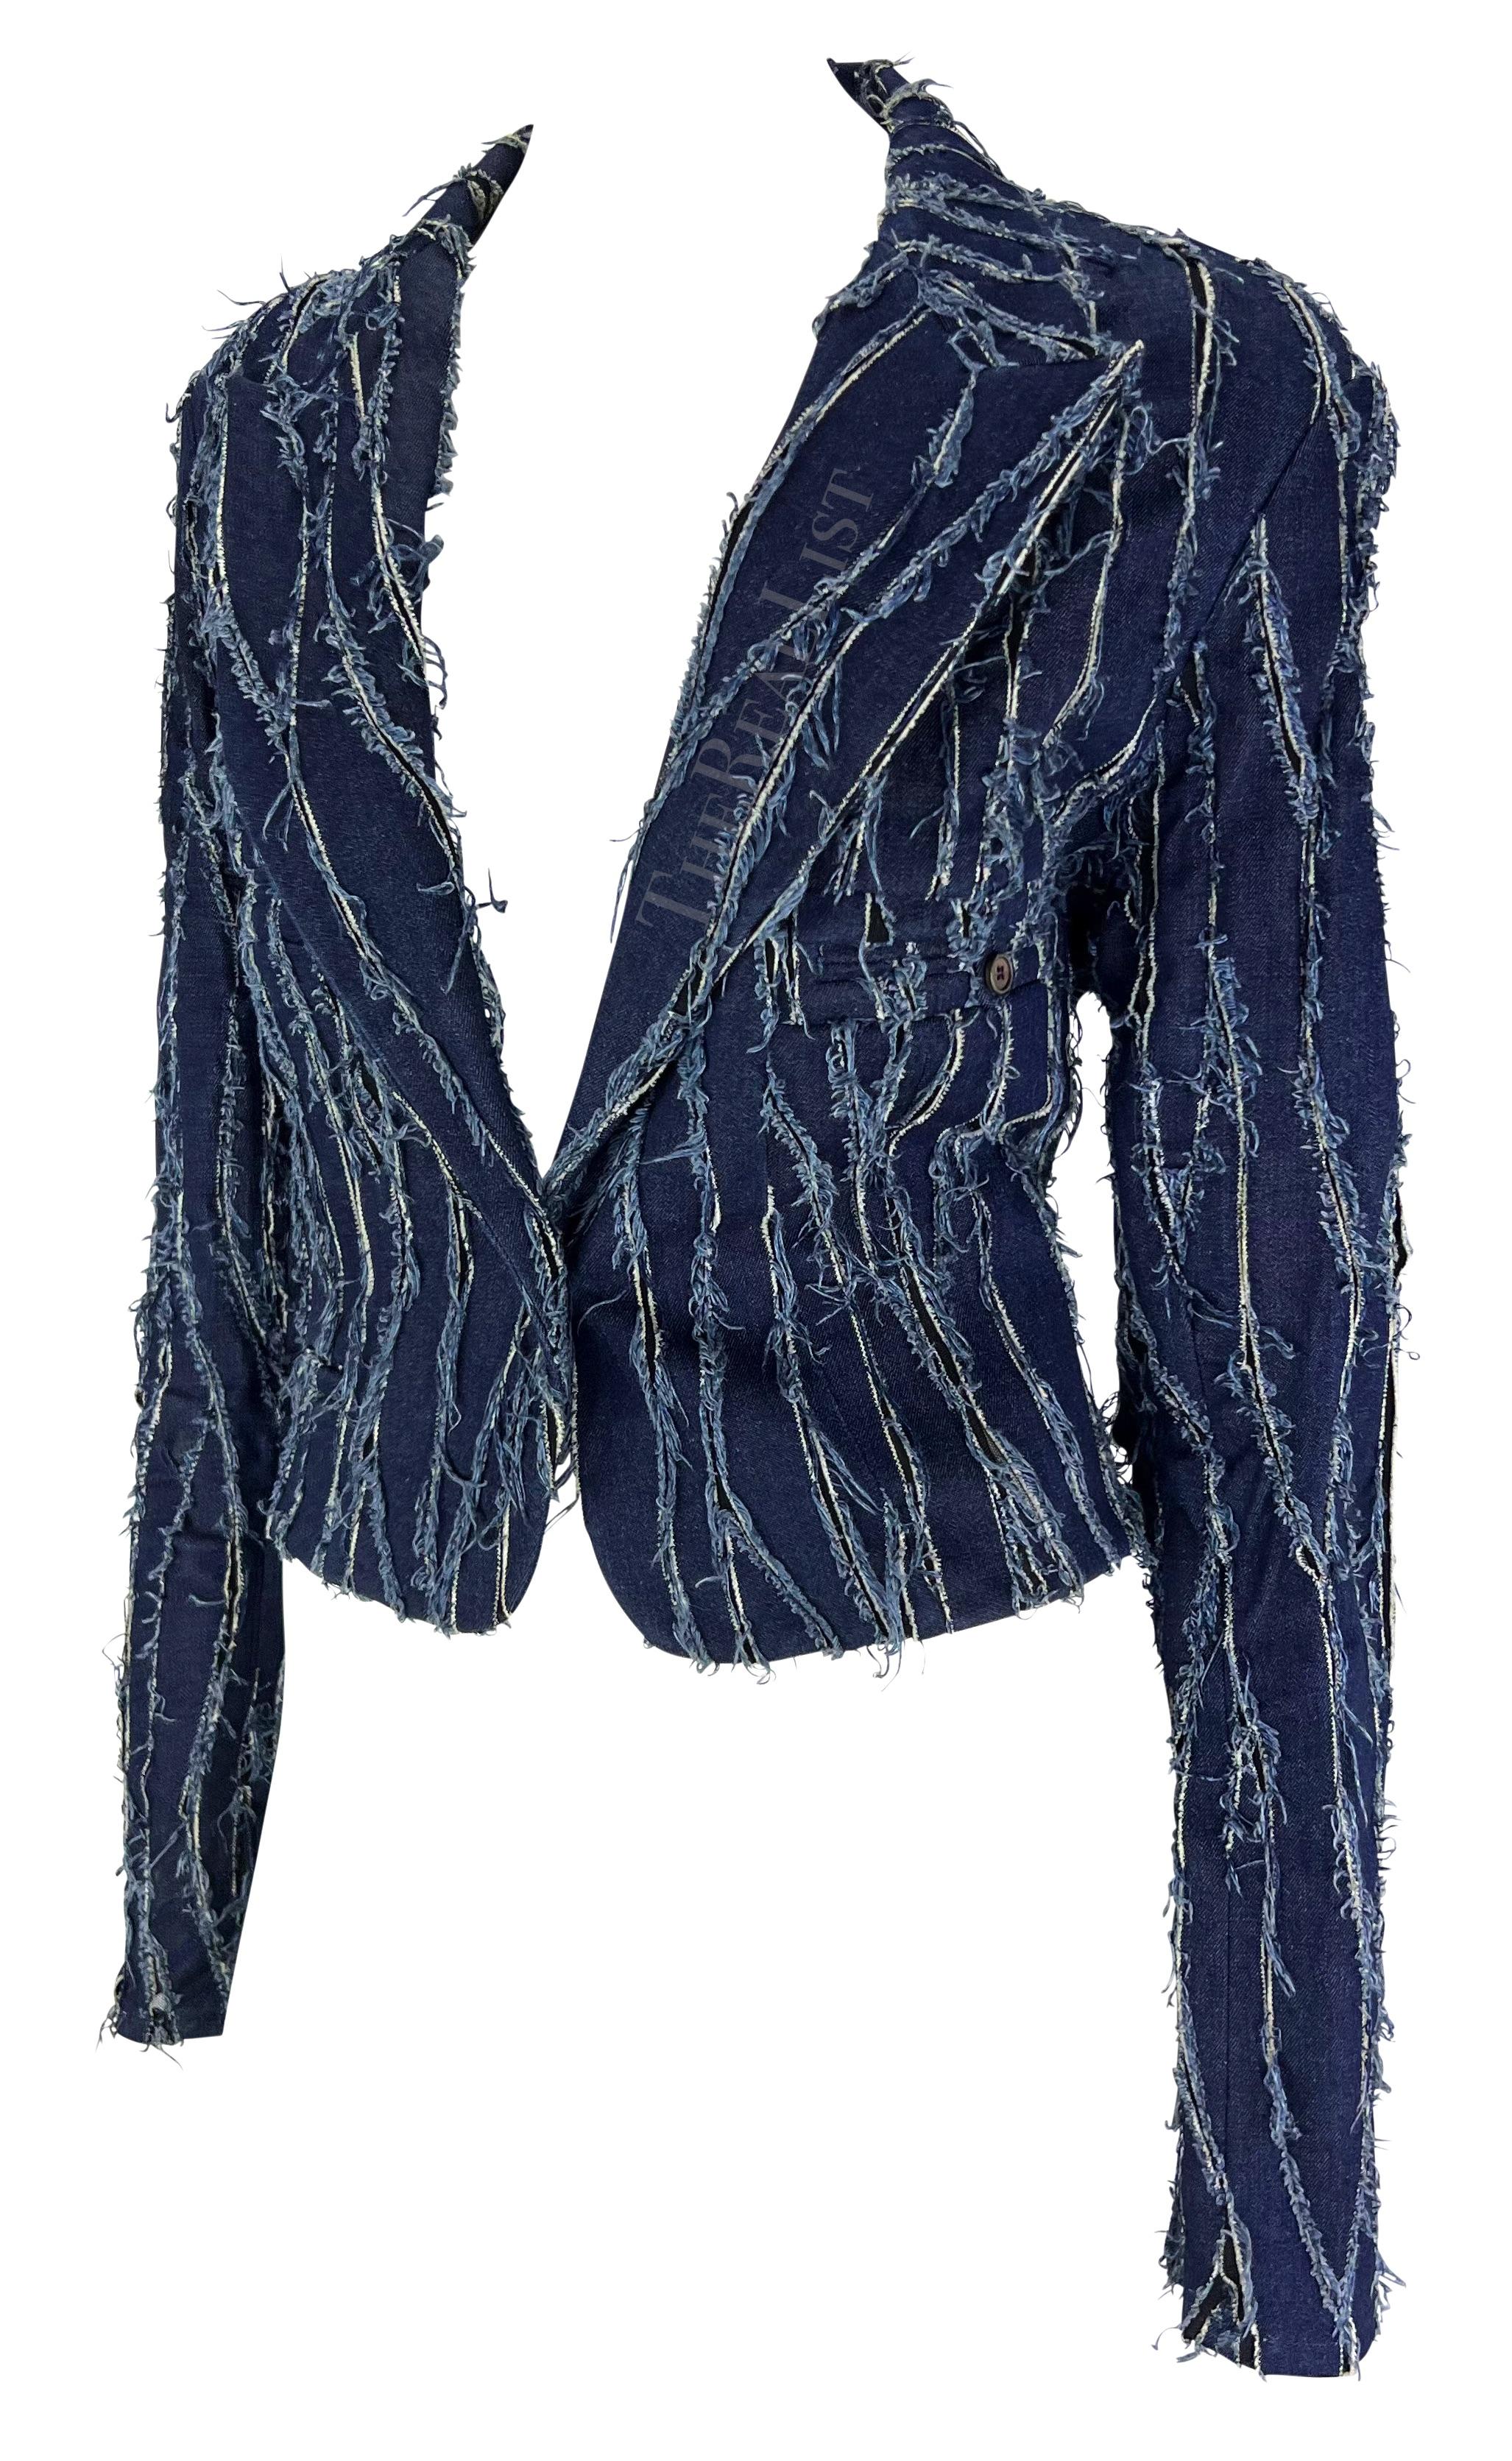 Presenting an incredible distressed Christian Dior denim blazer, designed by John Galliano. From the Fall/Winter 2001 collection, this chic cropped blazer is constructed of distressed denim patches placed atop mesh fabric that is playfully featured